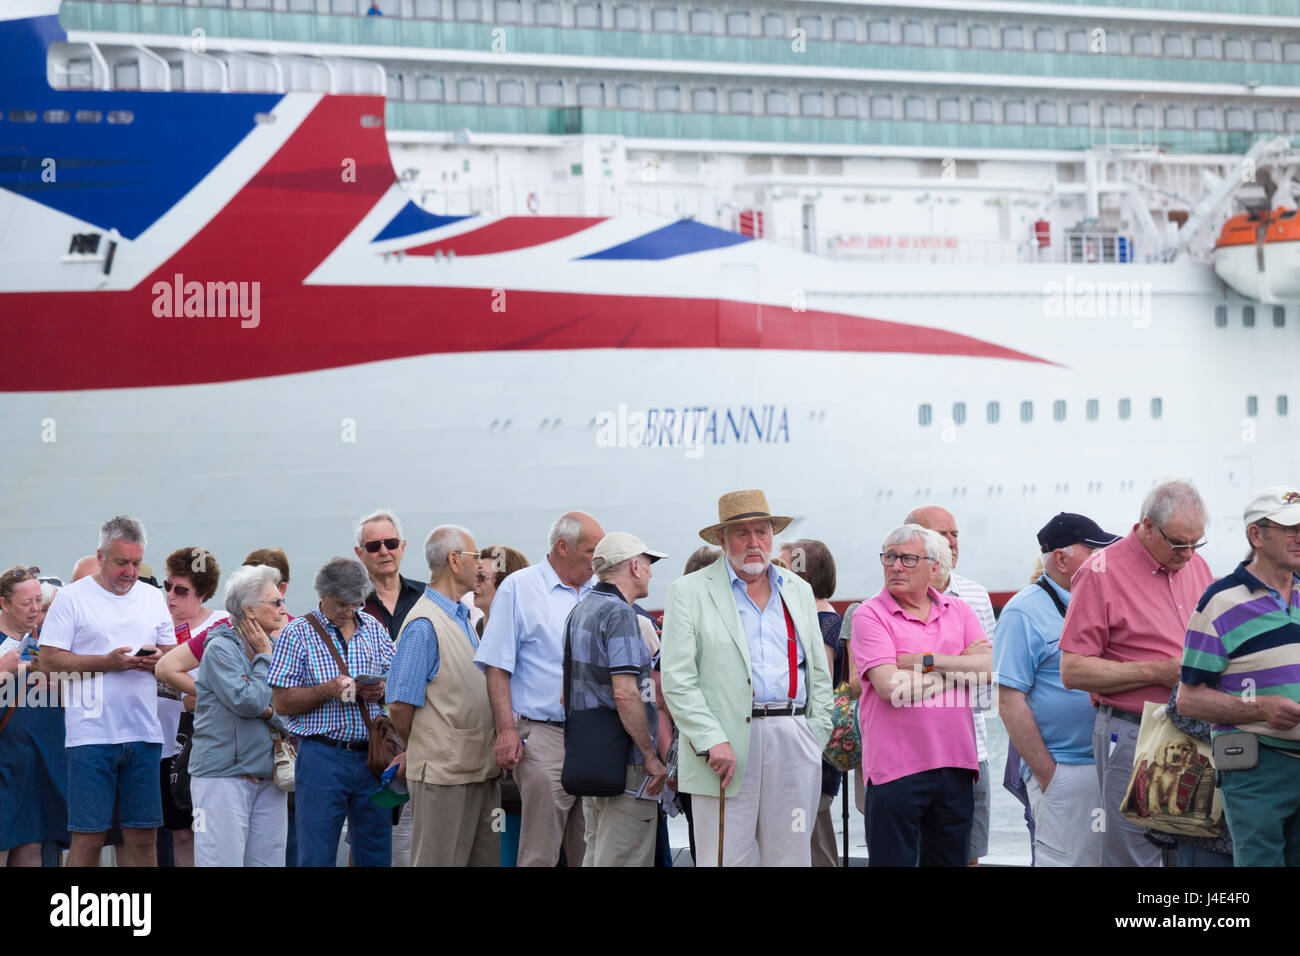 Las Palmas, Gran Canaria, Canary Islands, Spain, 12th May 2017.  Weather: cruise ship passengers queue for sightseeing bus as Cruise ship Britannia, the largest cruise ship built exclusively for the British market, visits Las Palmas during Canary Islands cruise. P&O cruises flagship is 330 metres long, weighs 143,000 tonnes and also features a 94 metres (308 ft) Union Flag on her bow, said to be the largest of its kind in the world. Credit: ALAN DAWSON/Alamy Live News Stock Photo